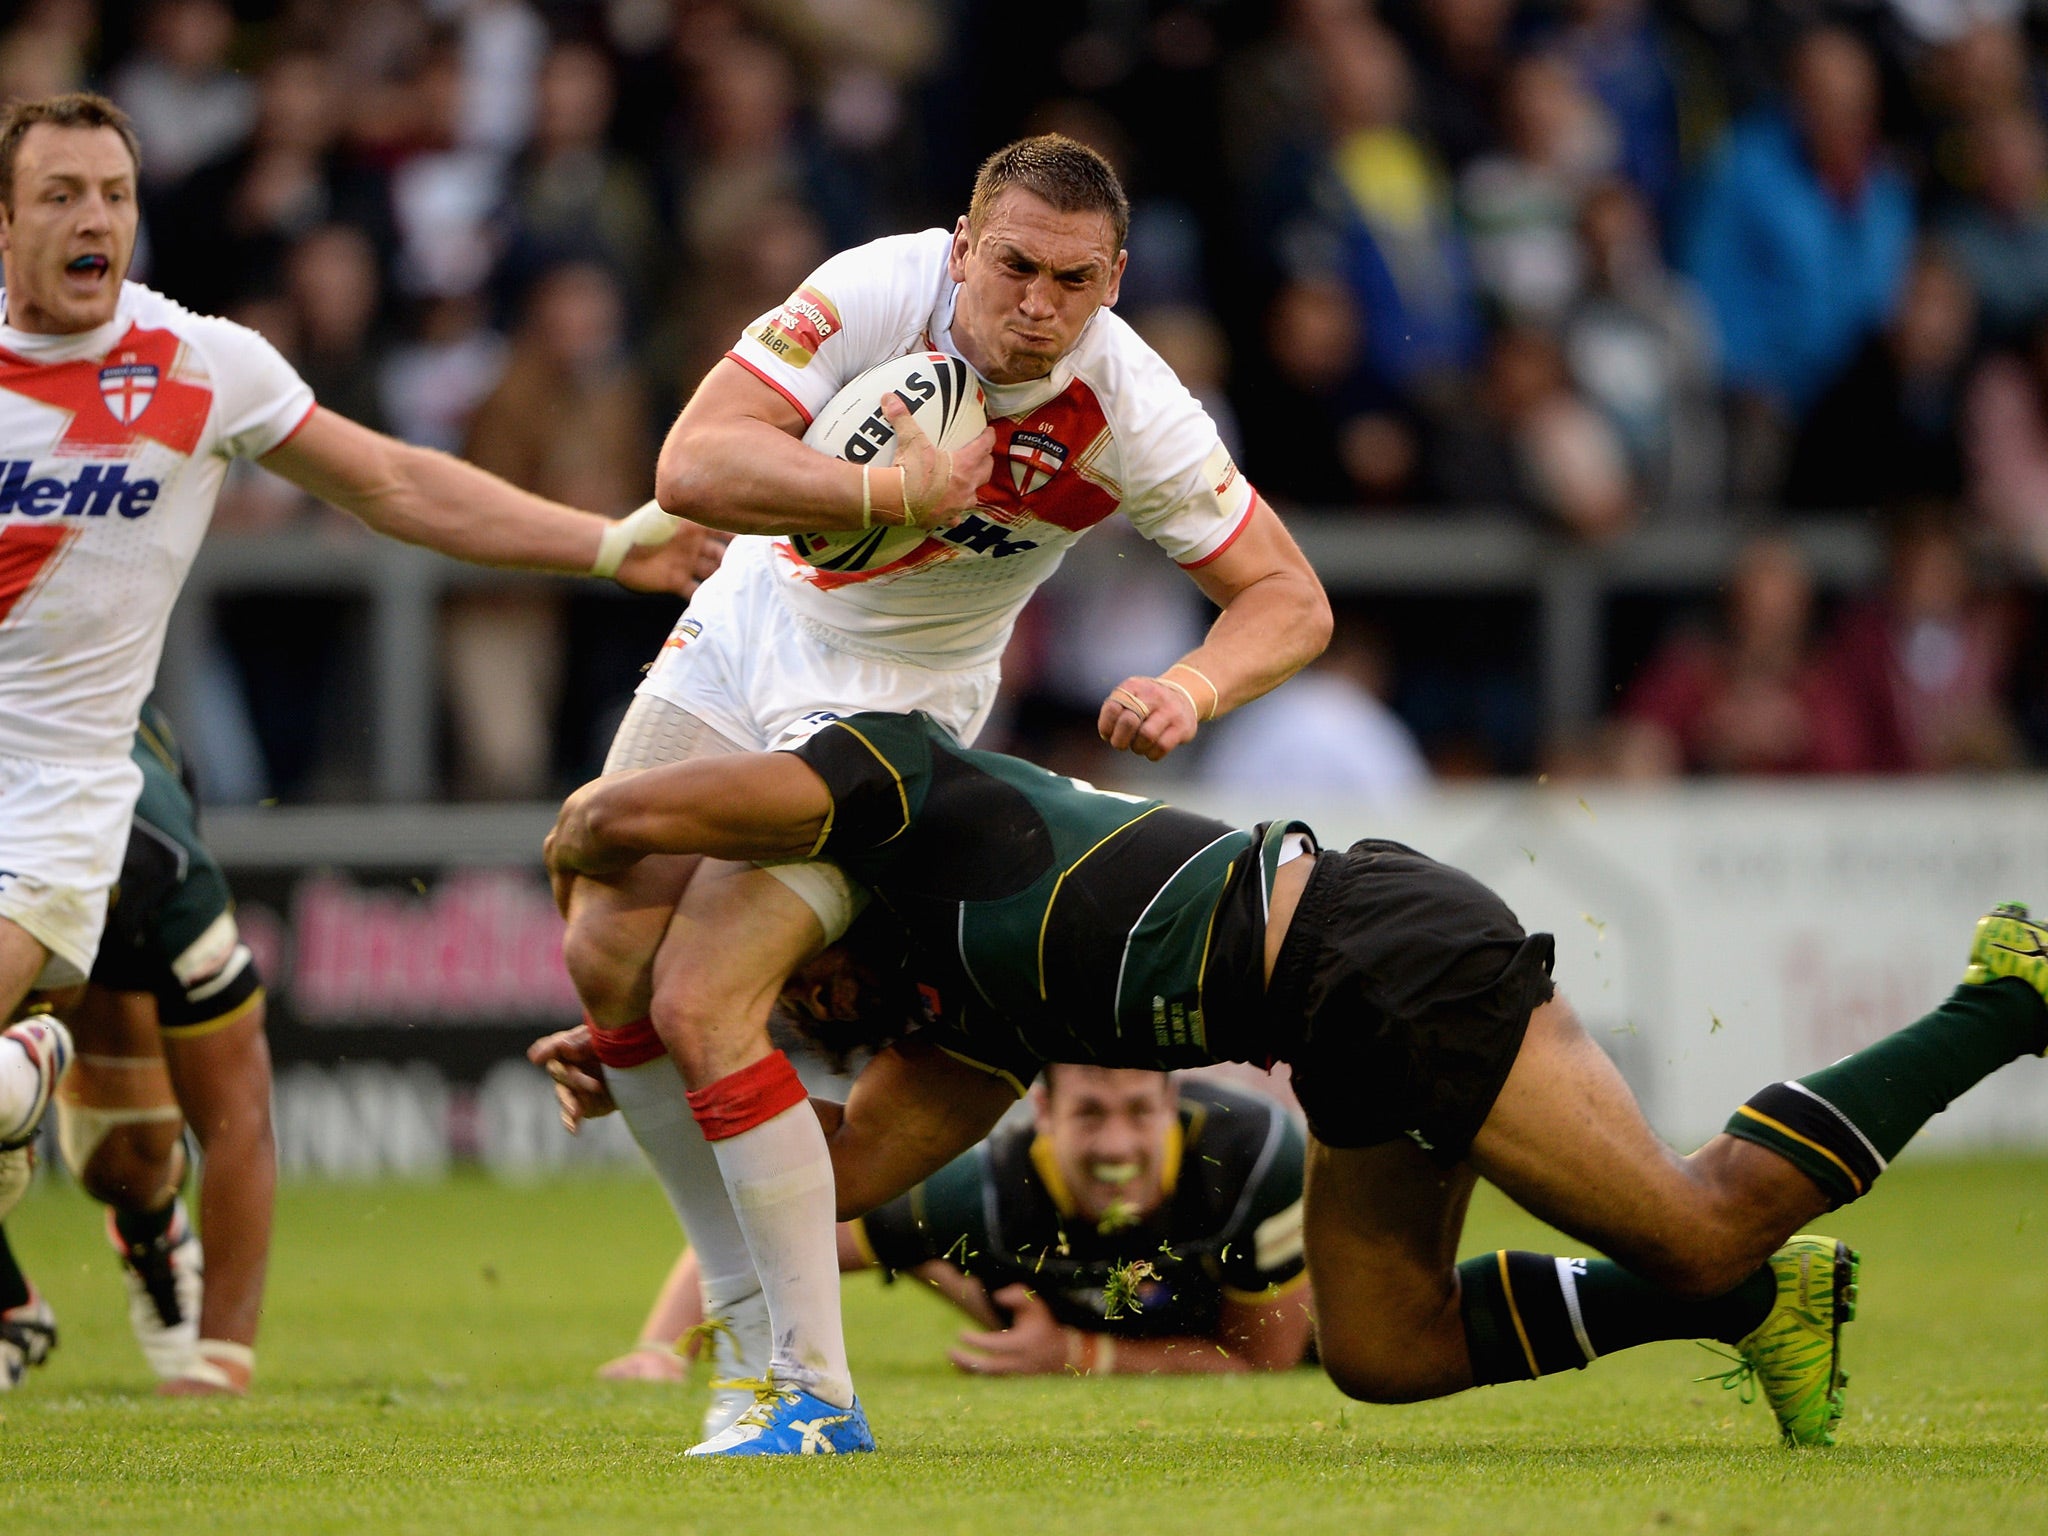 England captain Kevin Sinfield attempts to break the tackle of Sia Soliola